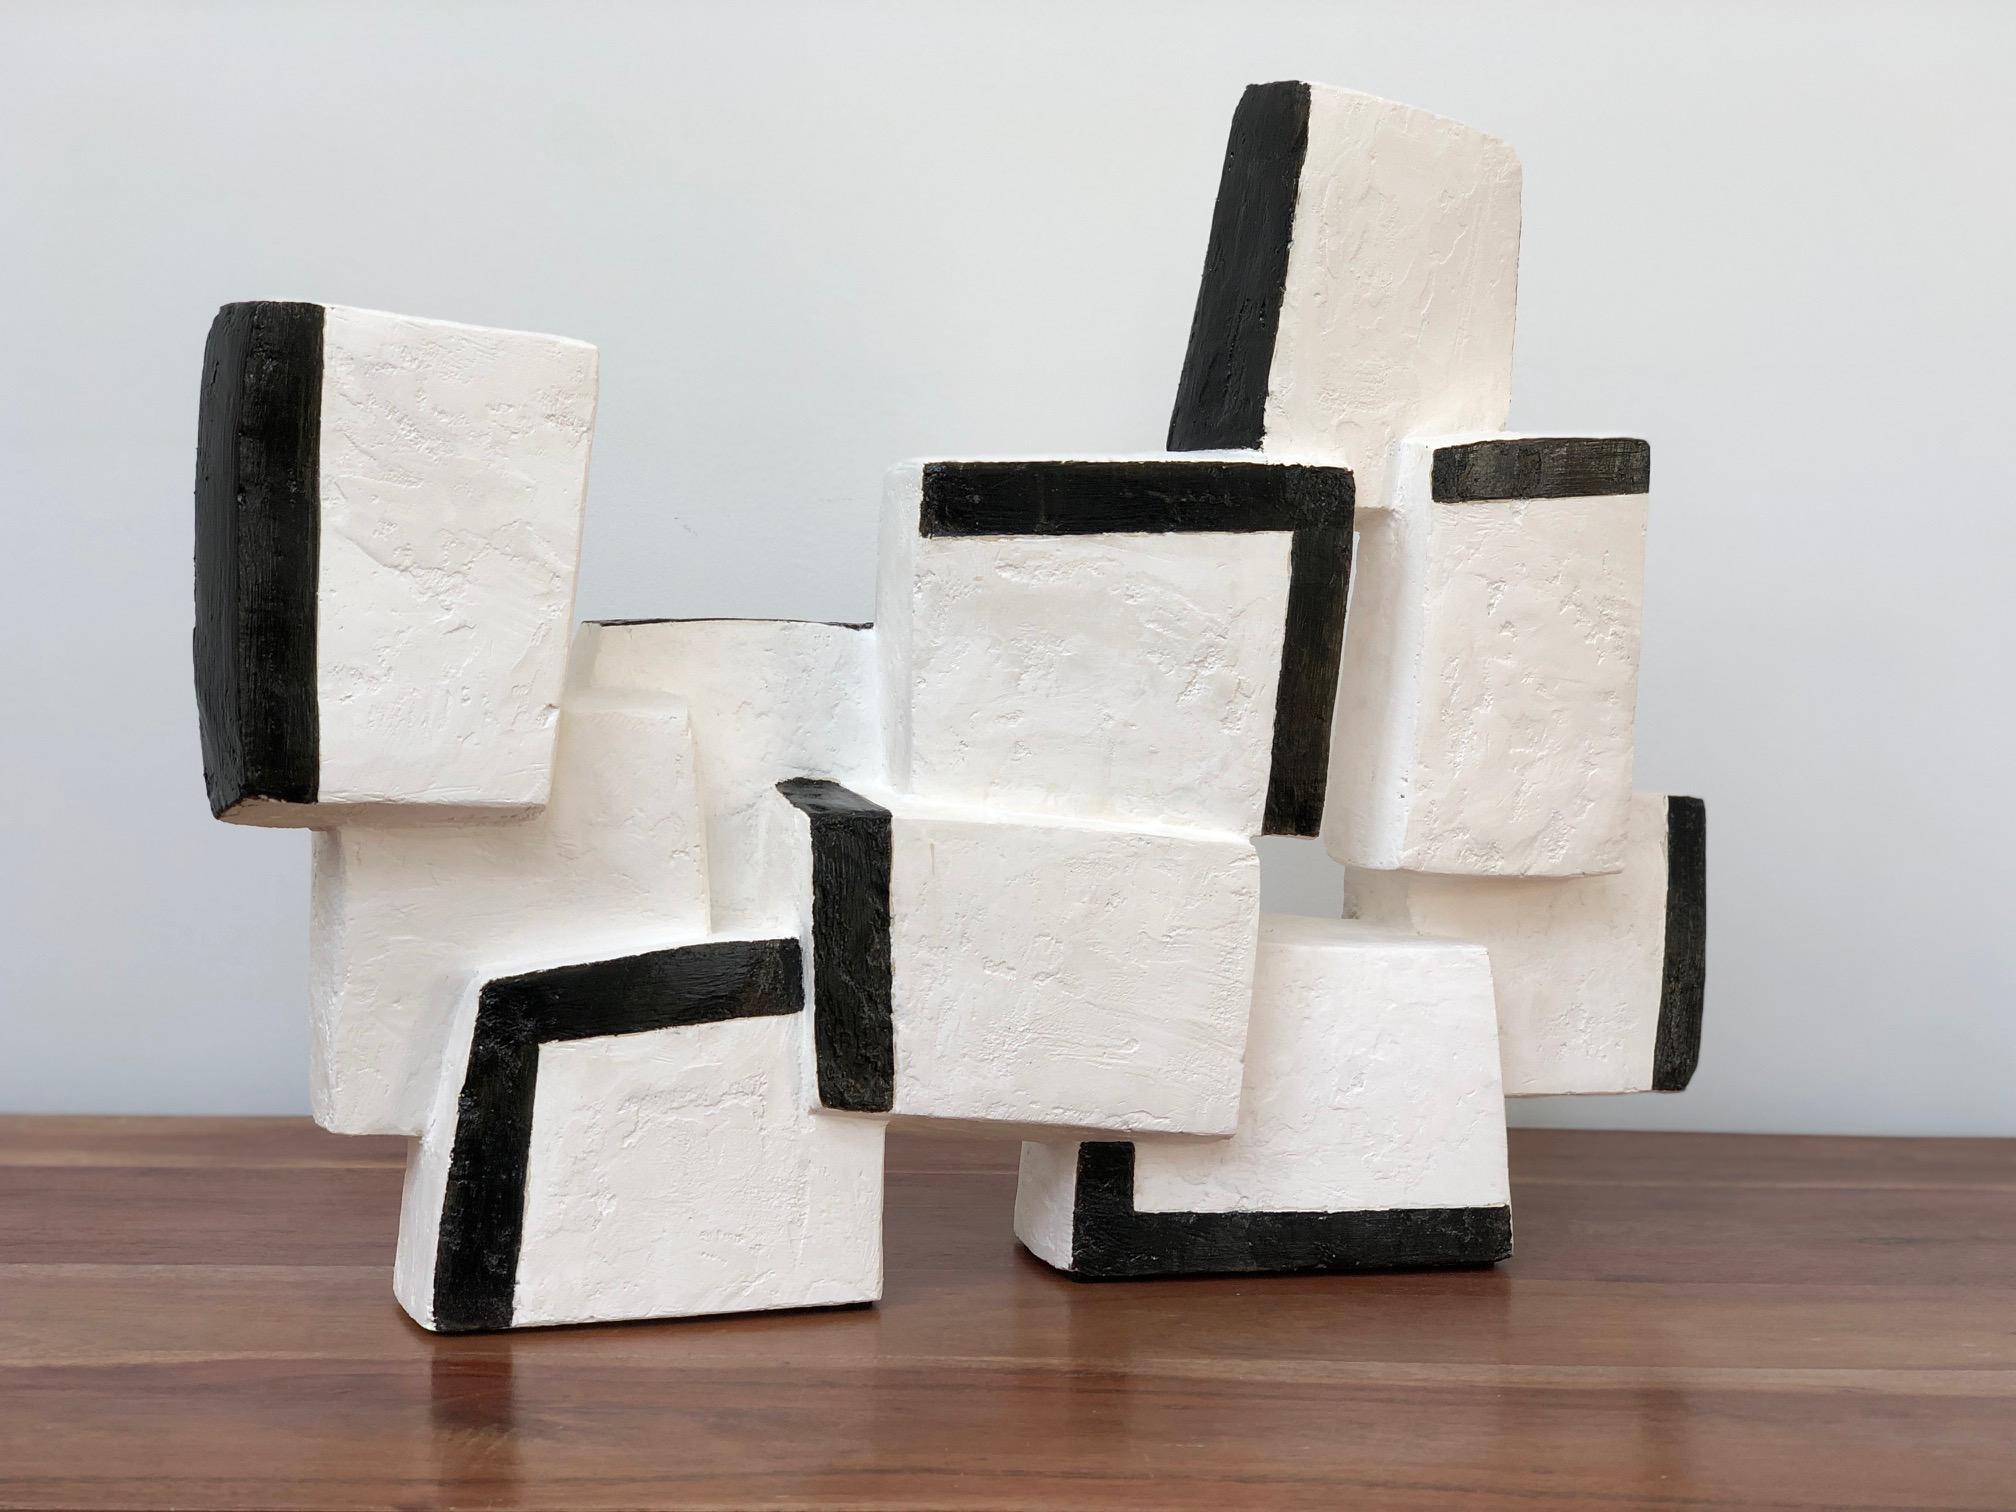 abstract geometric sculptures